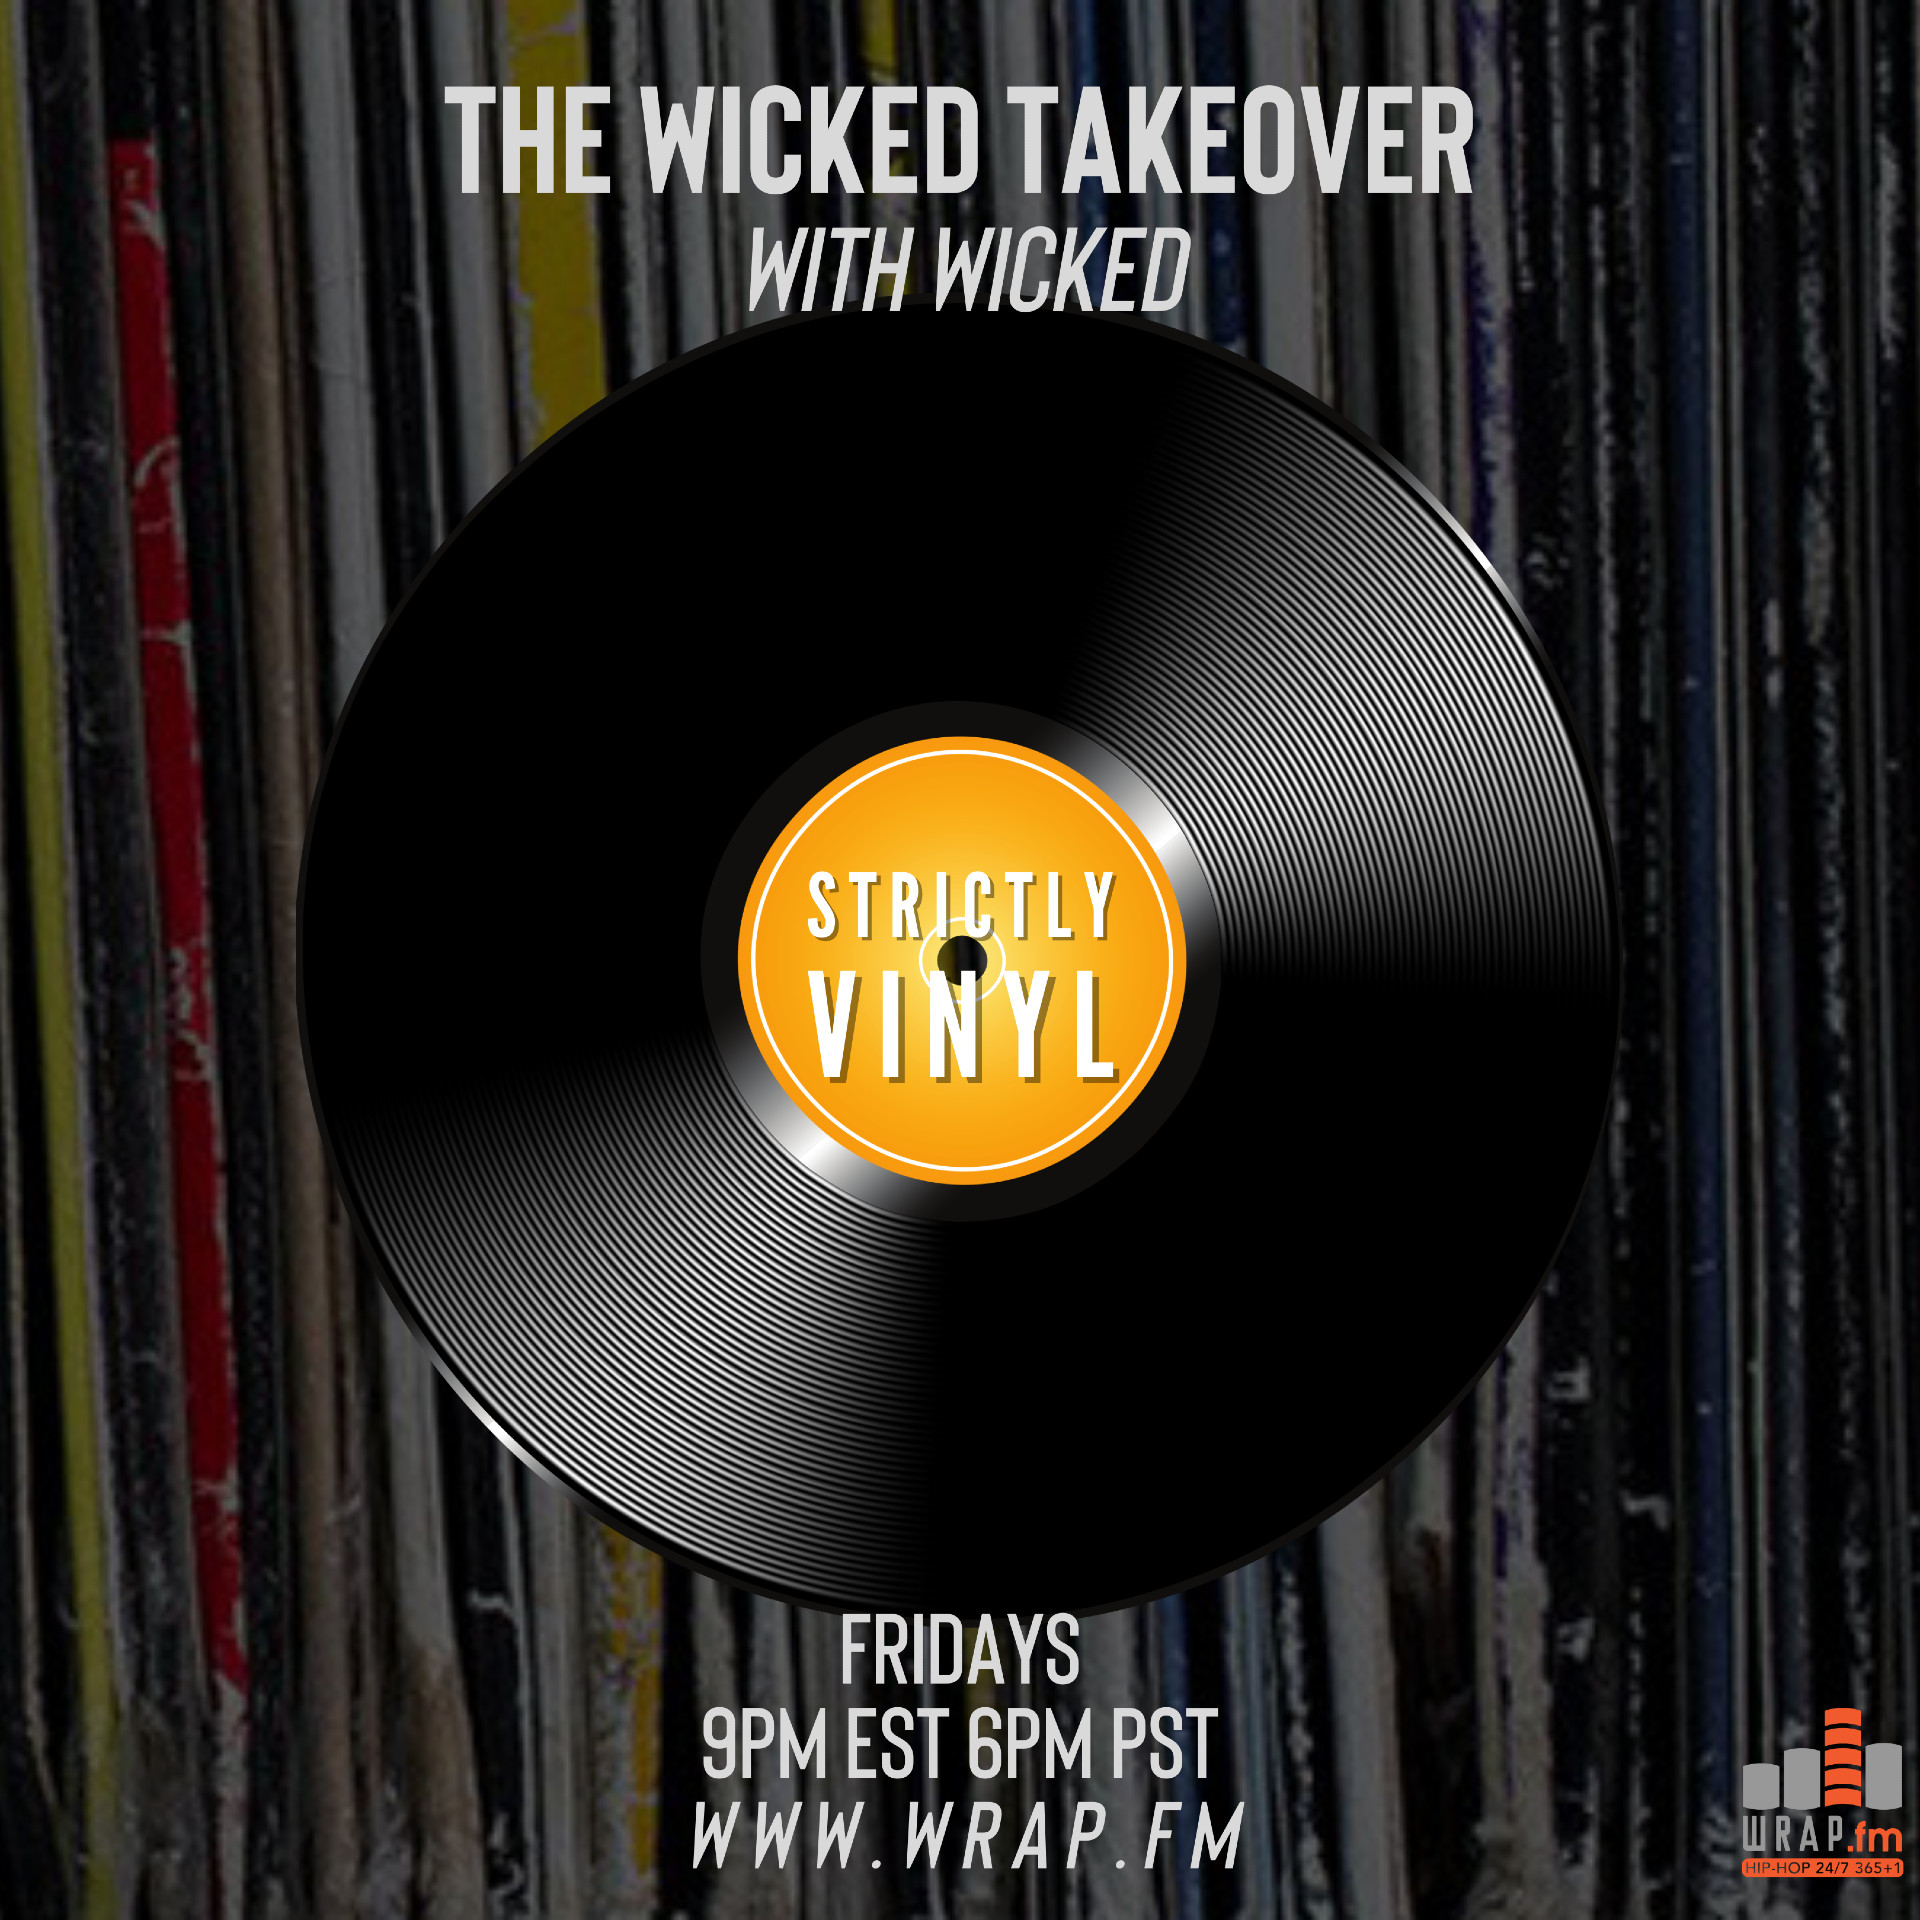 The Wicked Takeover